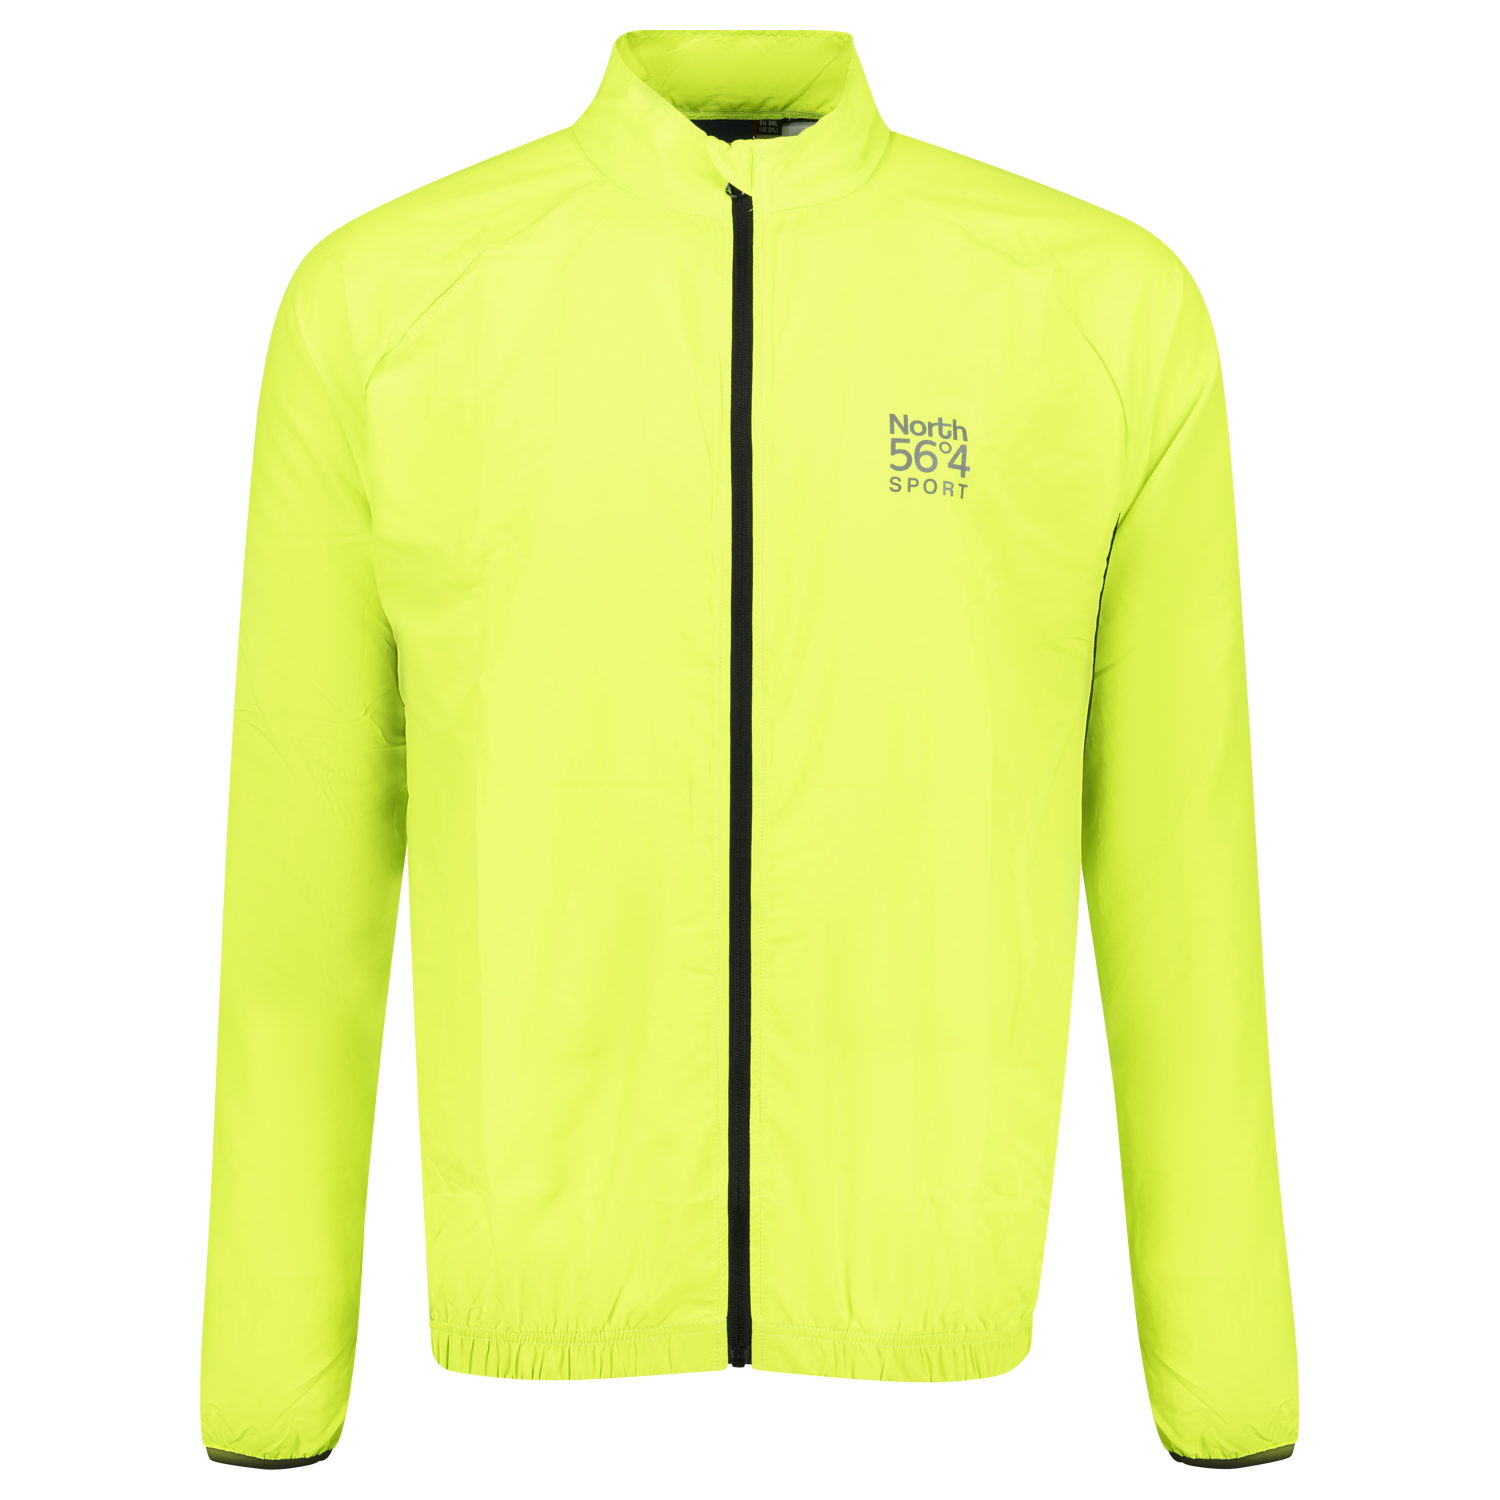 Sports and bike jacket in yellow by North 56°4 up to oversize 8XL